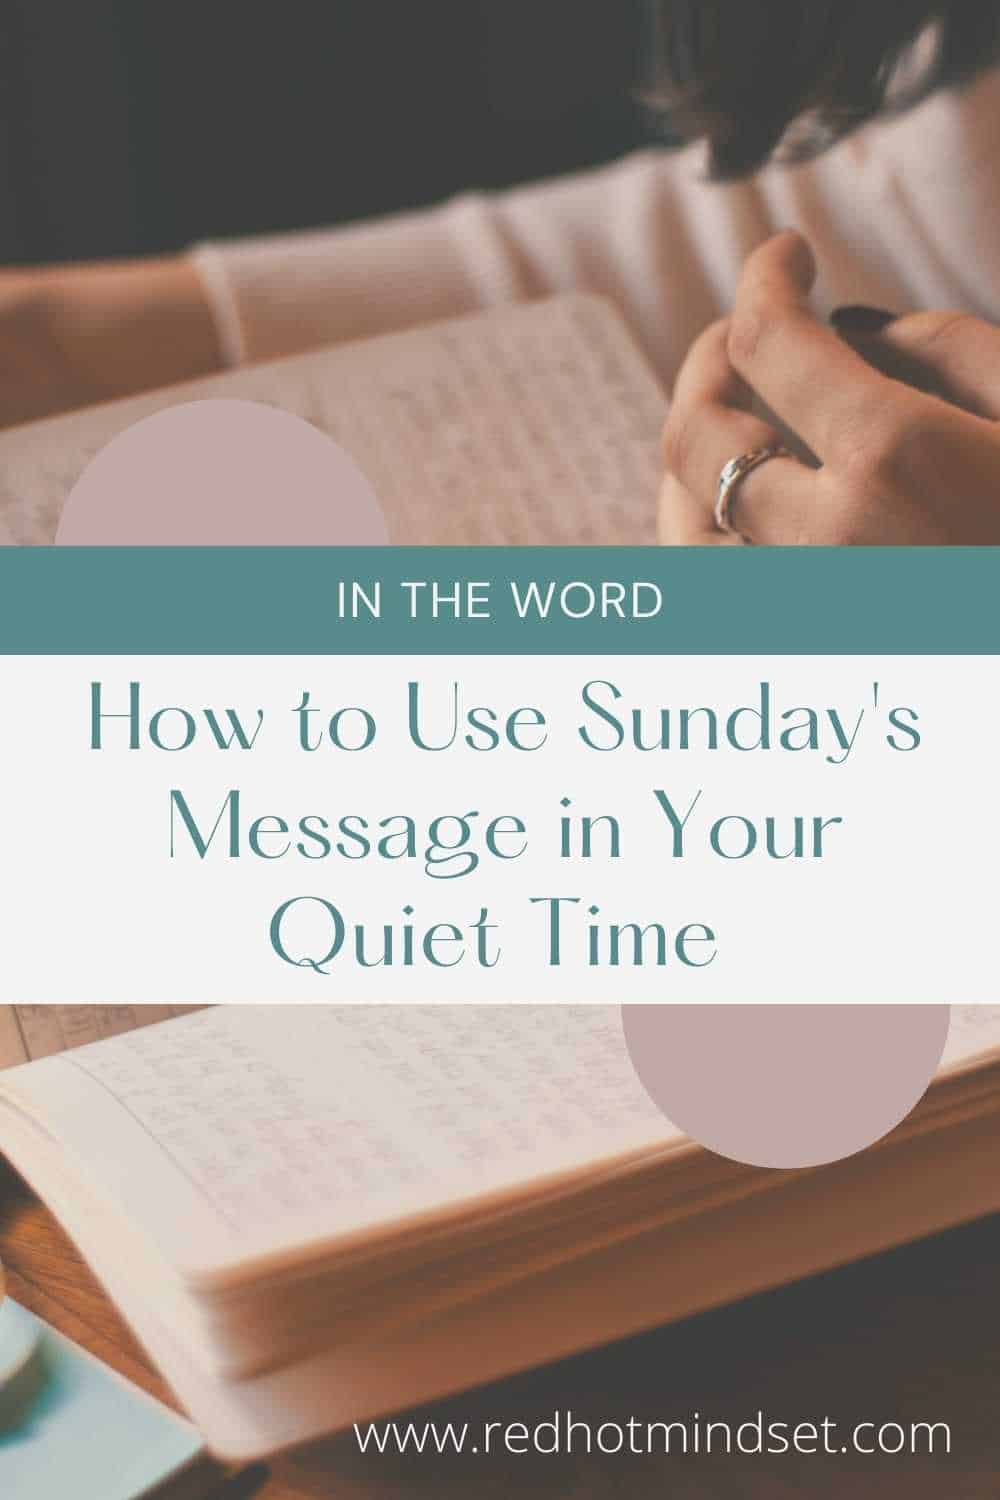 Ep 67 | 5 Ways to Use Sunday’s Message in Your Quiet Time